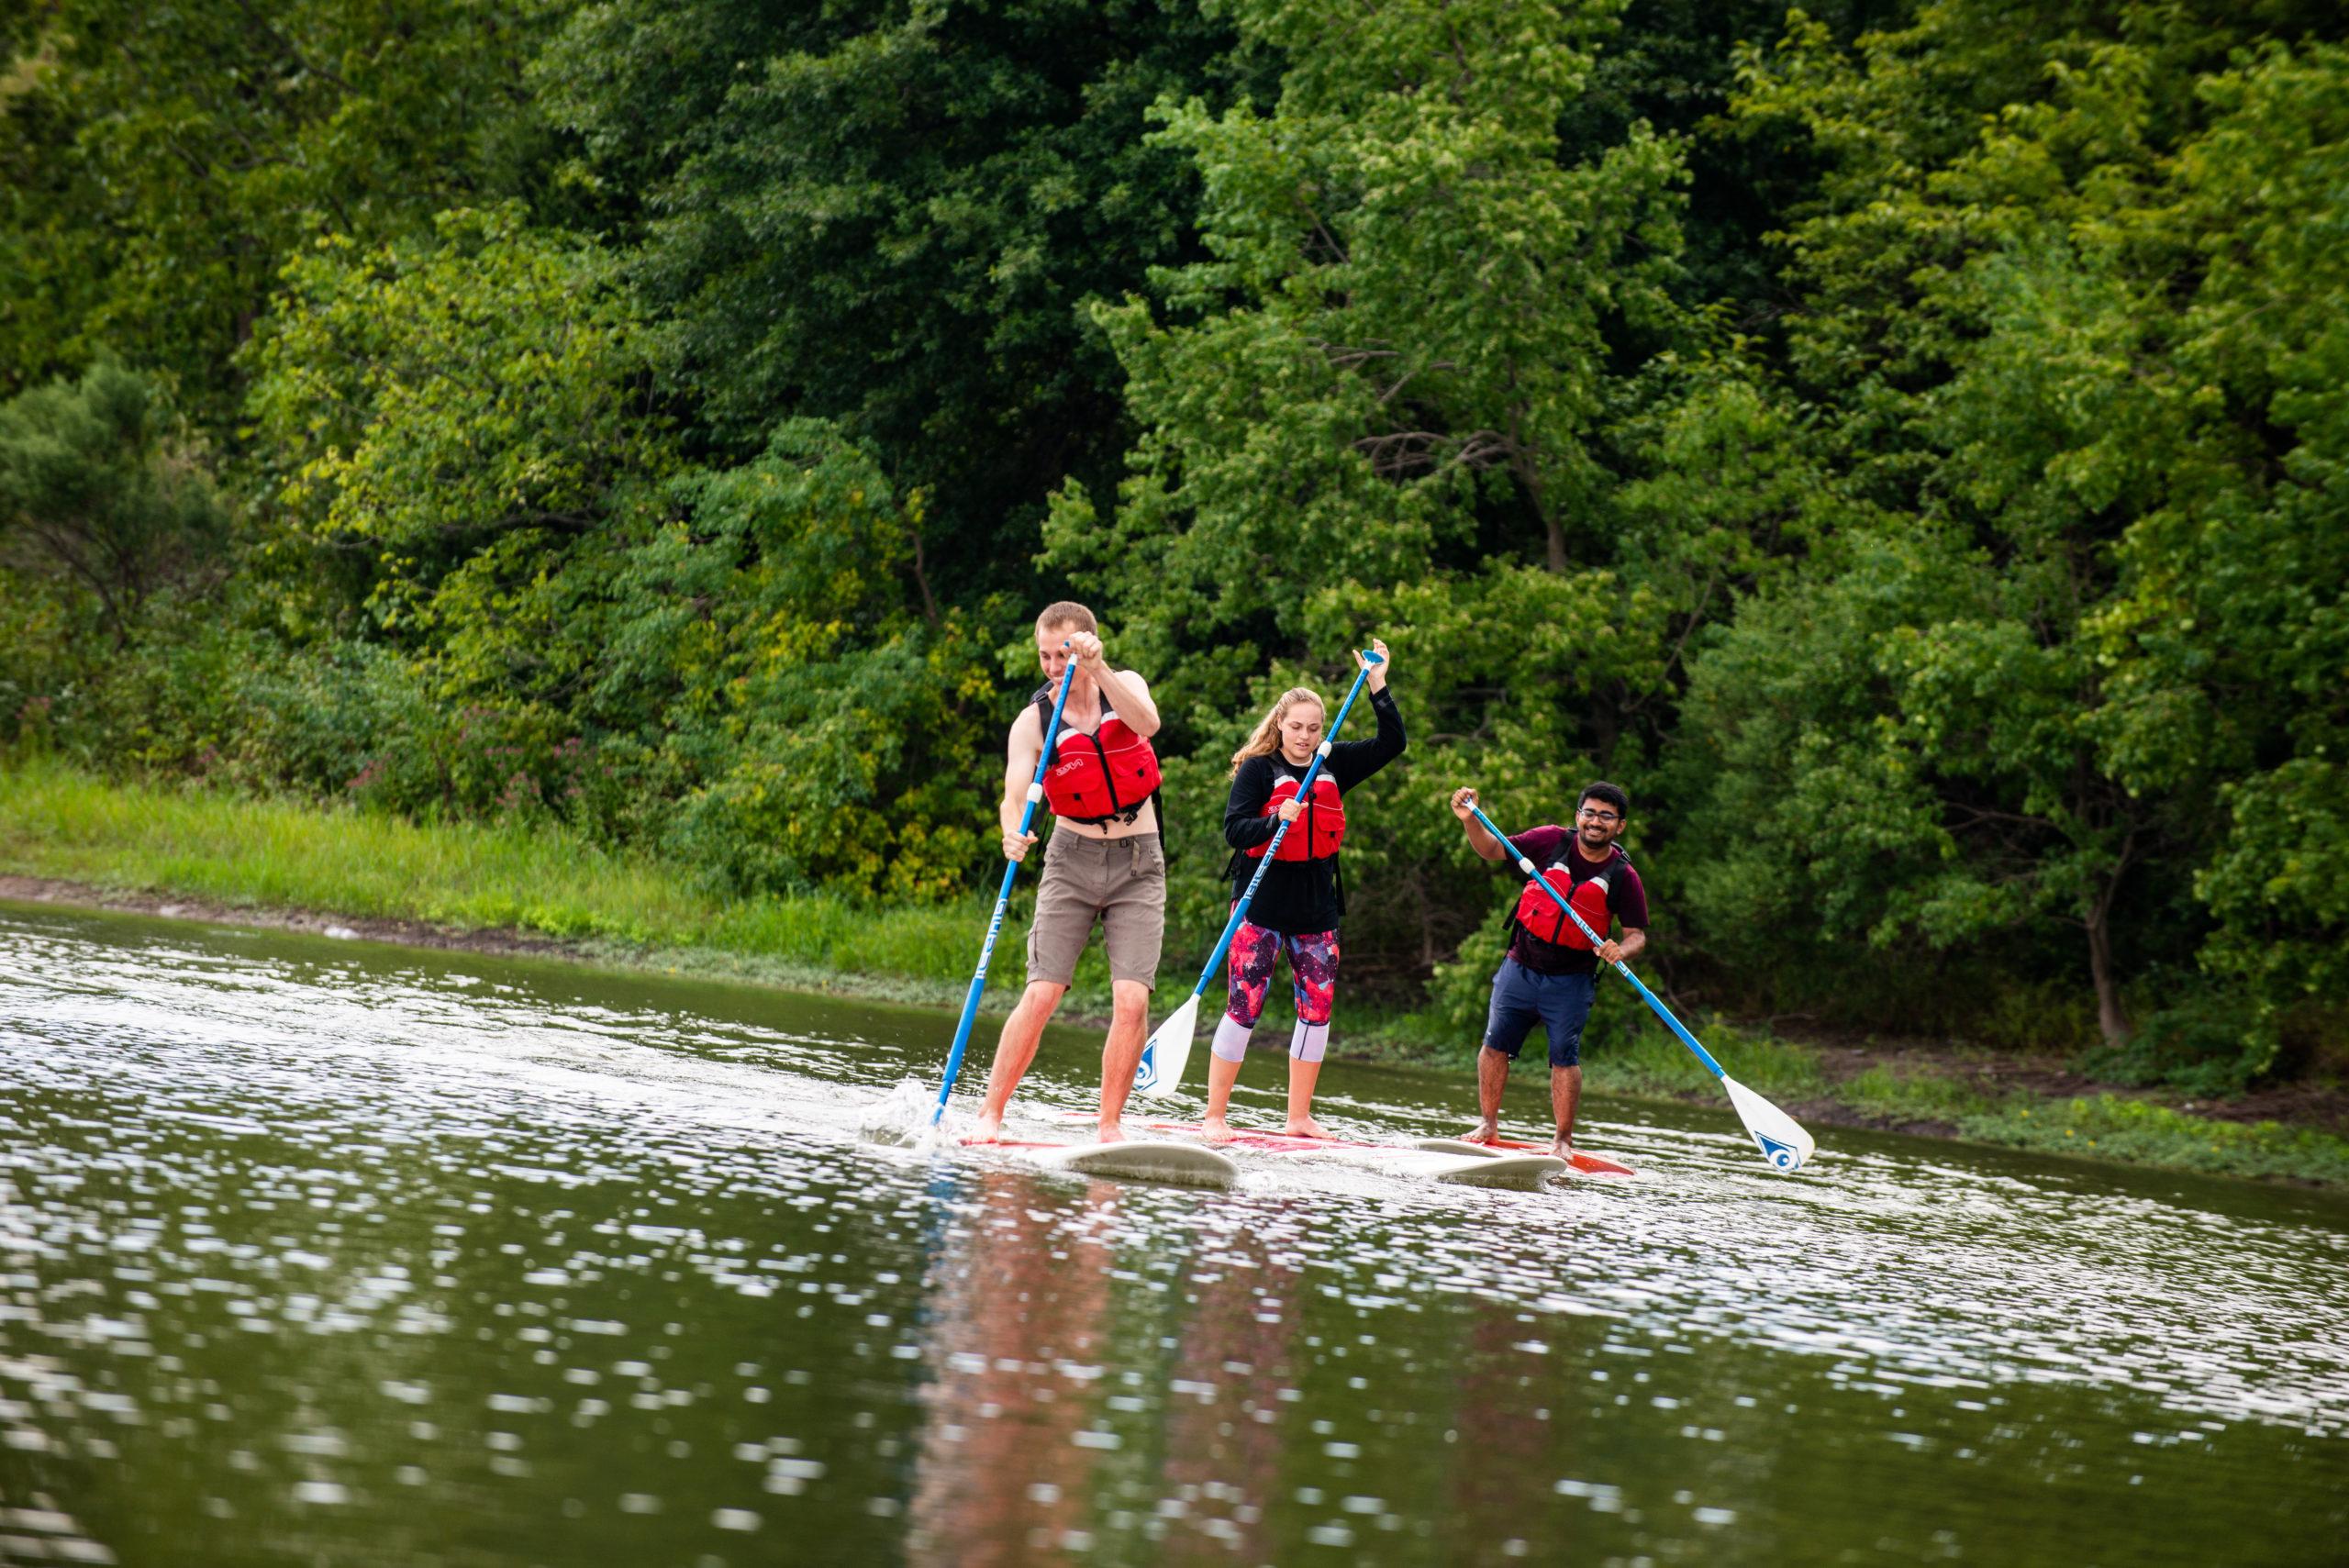 Students paddle boarding